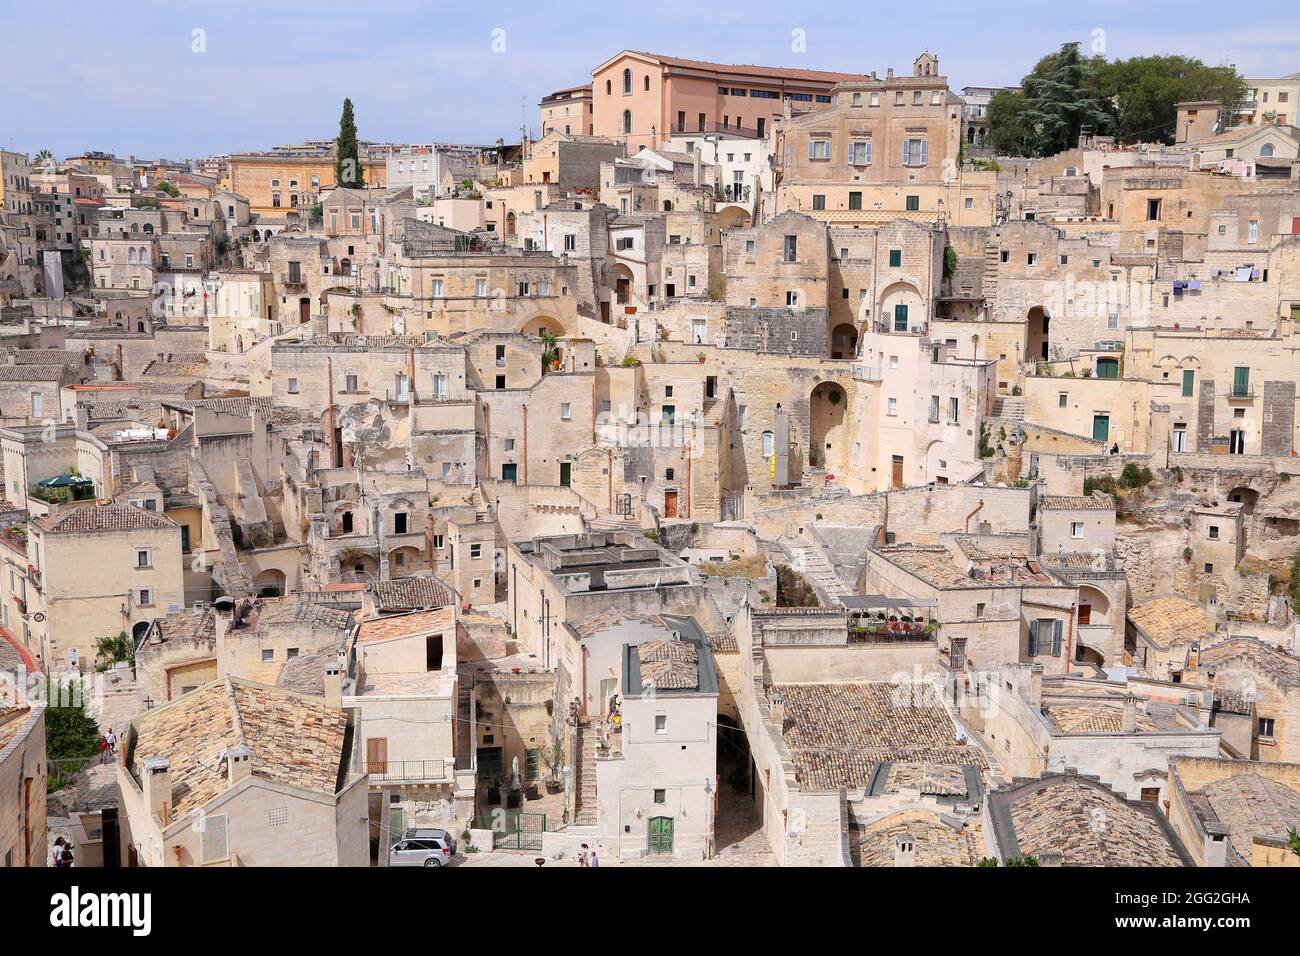 Matera, Italy - August 18, 2020: View of the Sassi di Matera a historic district in the city of Matera, well-known for their ancient cave dwellings. B Stock Photo